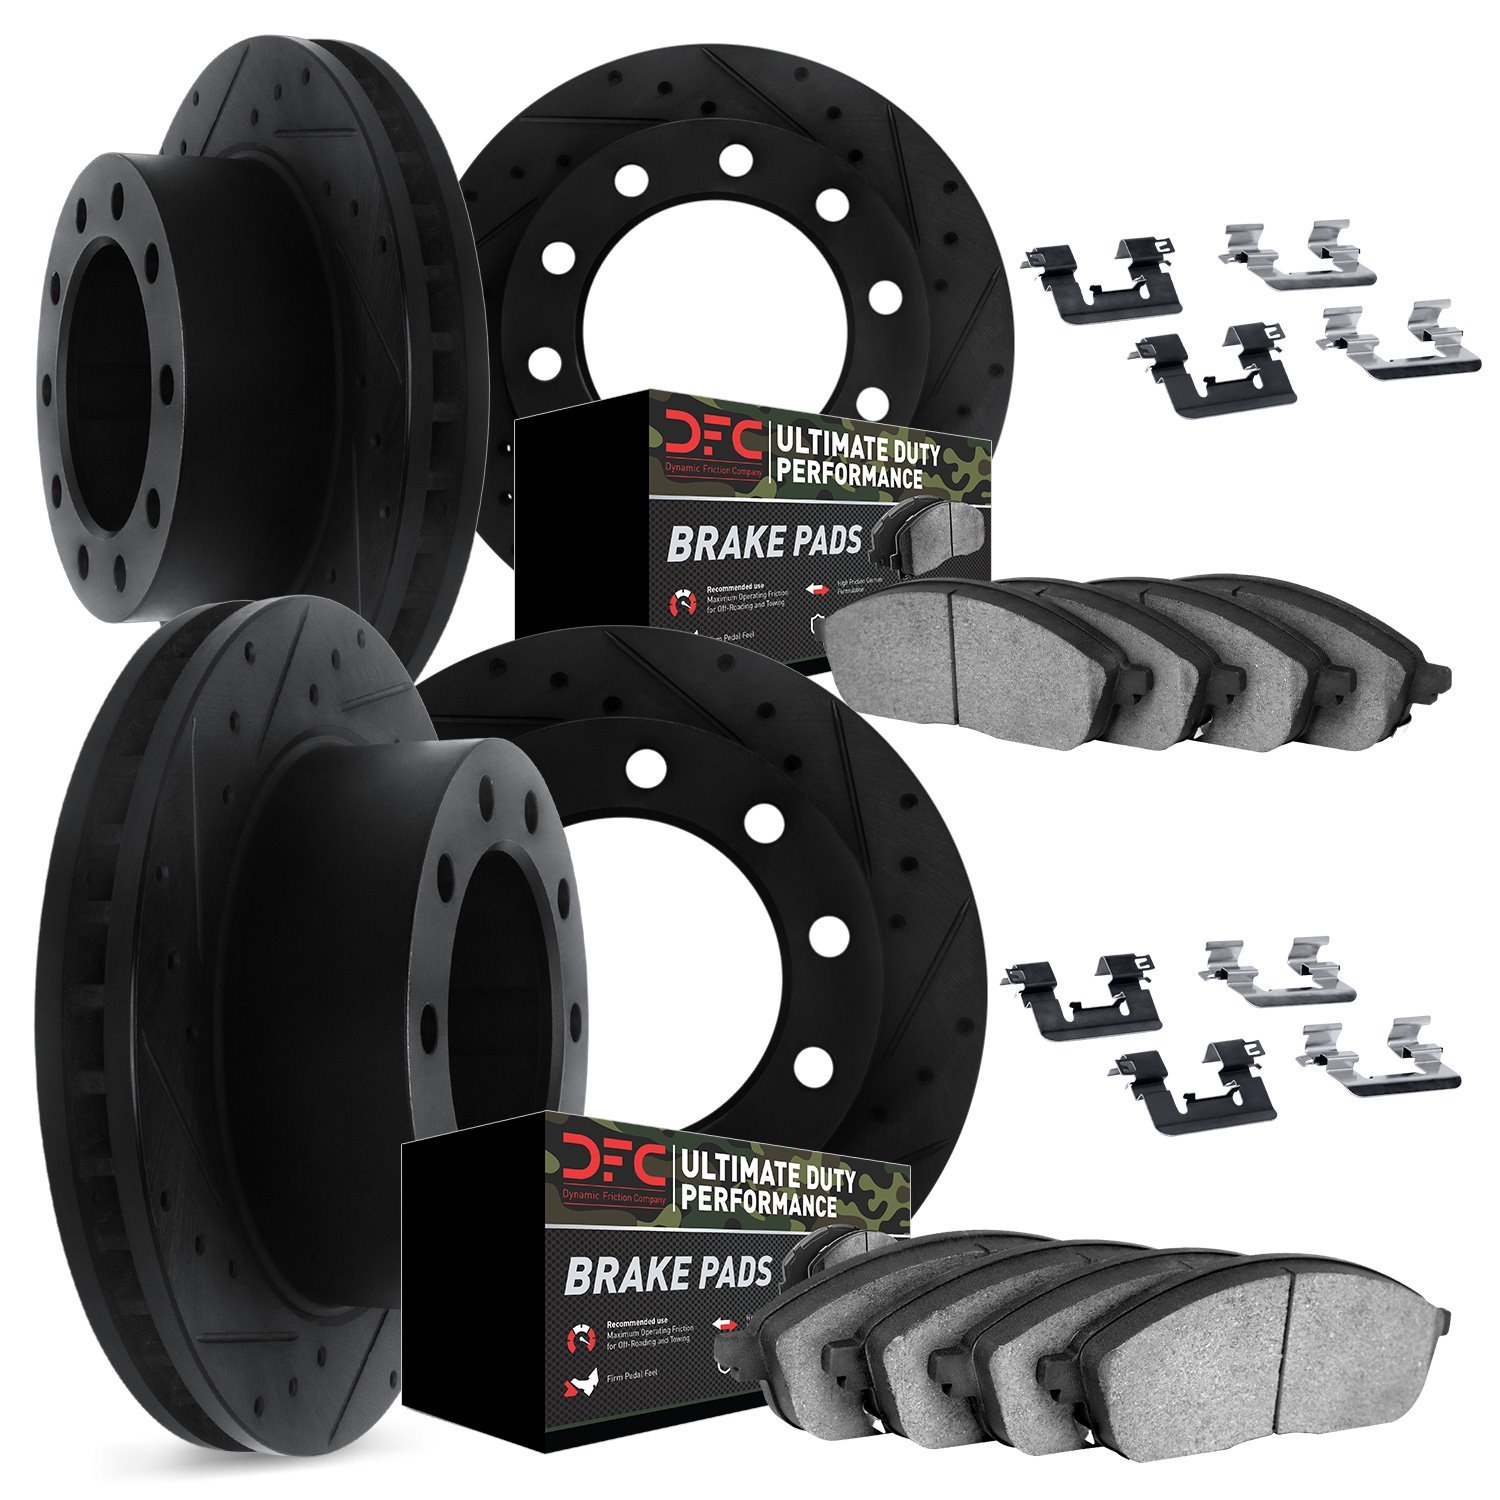 8414-54055 Drilled/Slotted Brake Rotors with Ultimate-Duty Brake Pads Kit & Hardware [Black], Fits Select Ford/Lincoln/Mercury/M